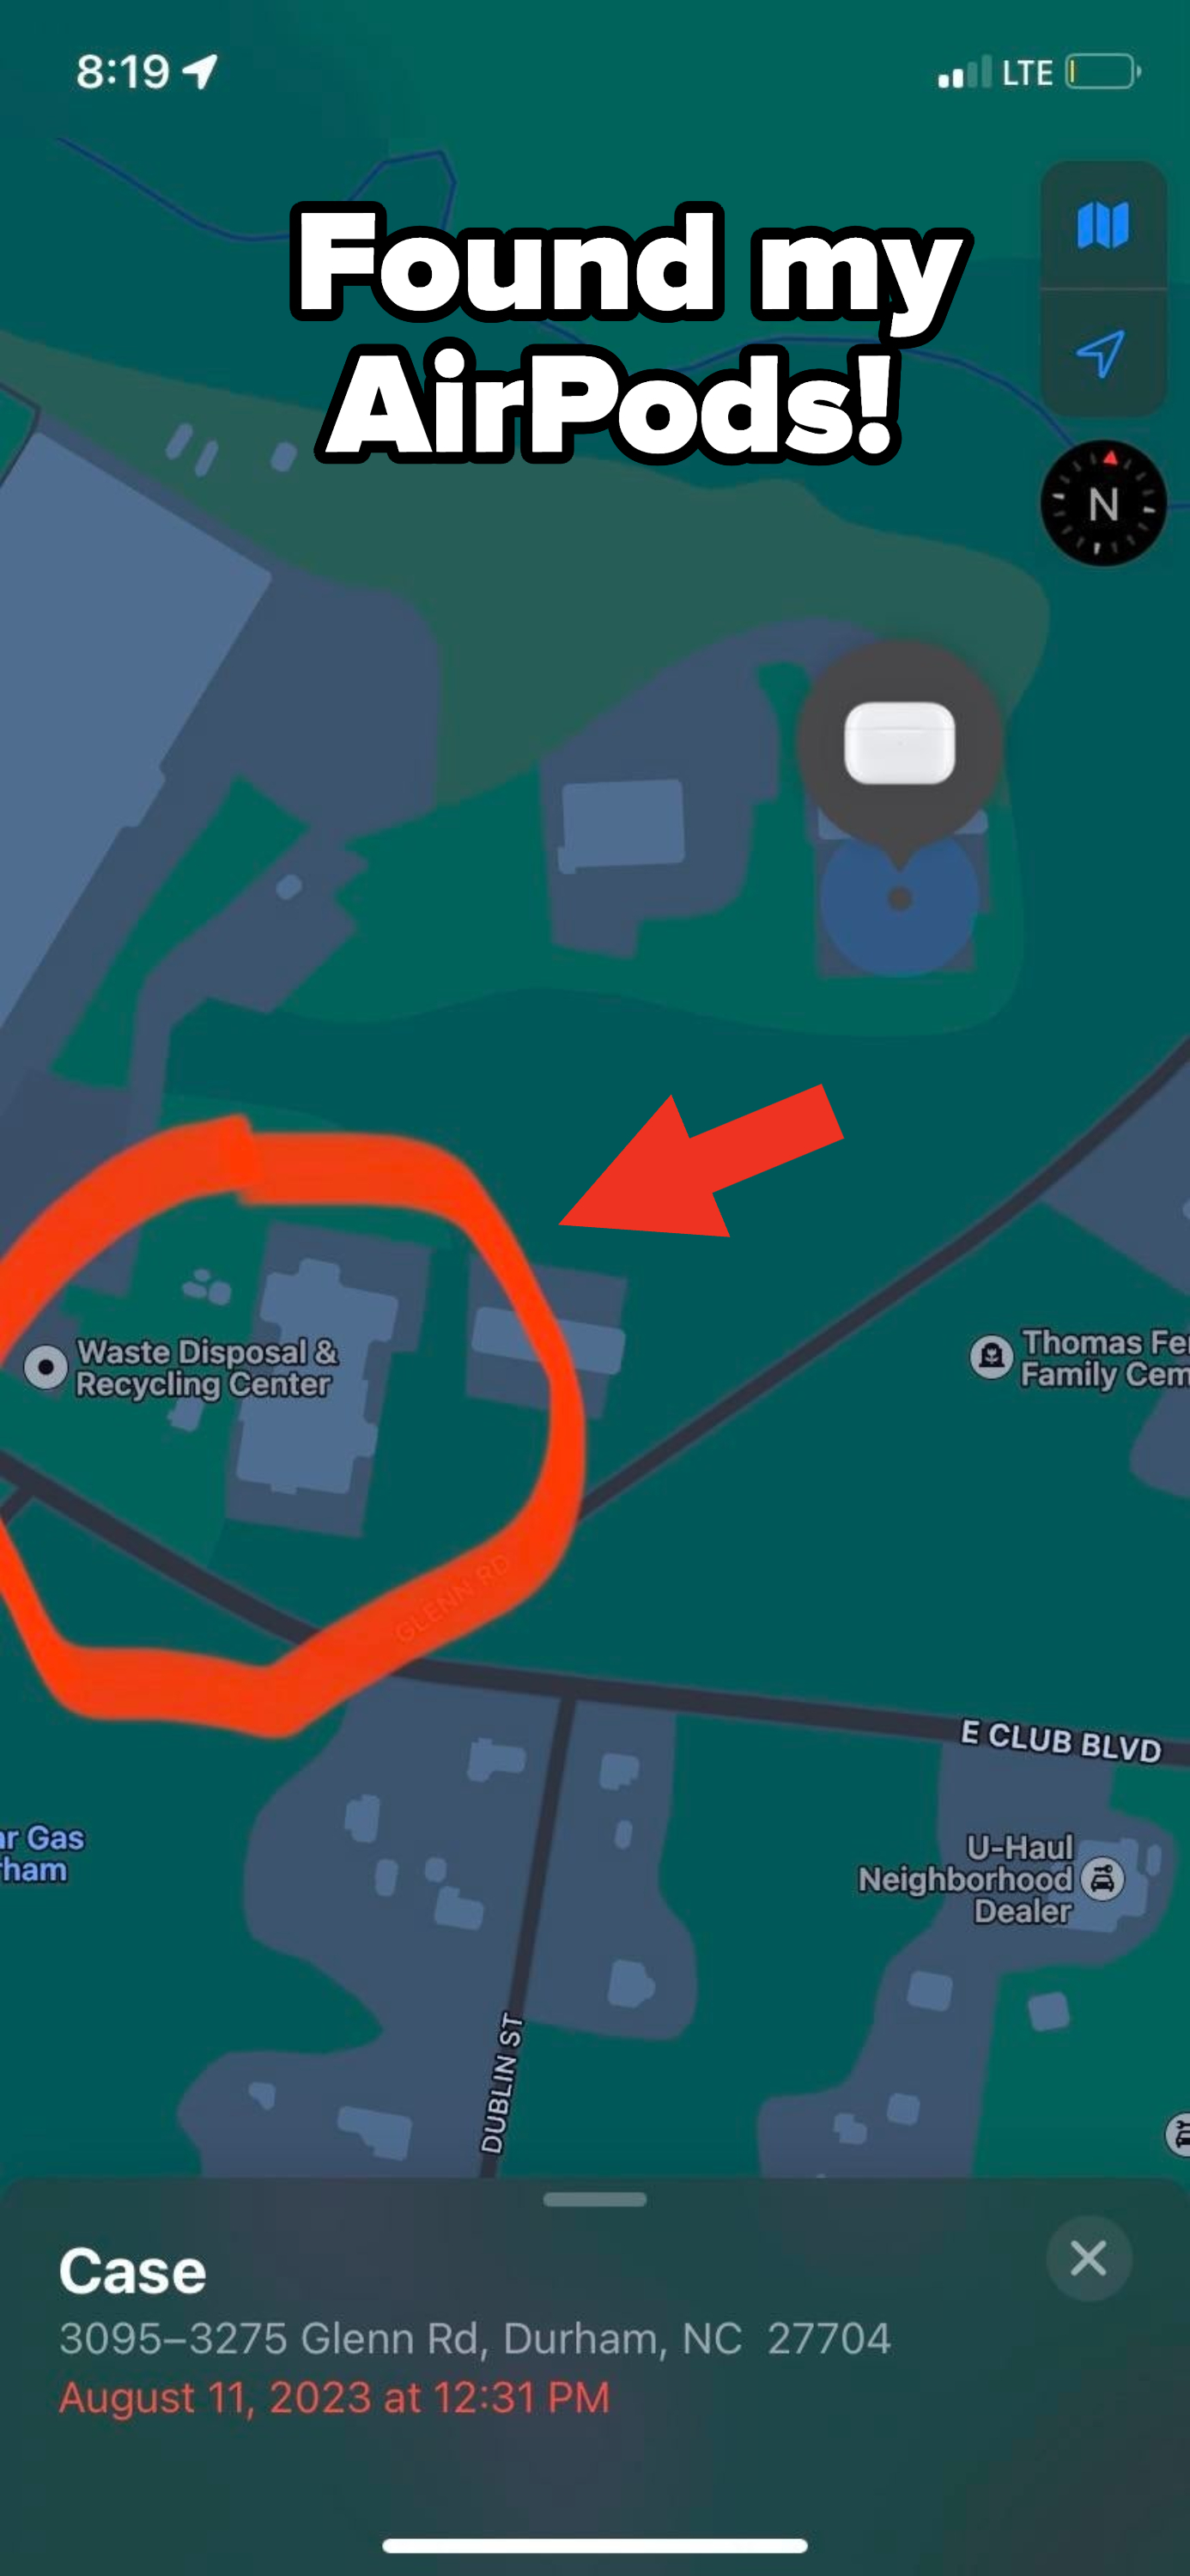 Arrow pointing to AirPods location